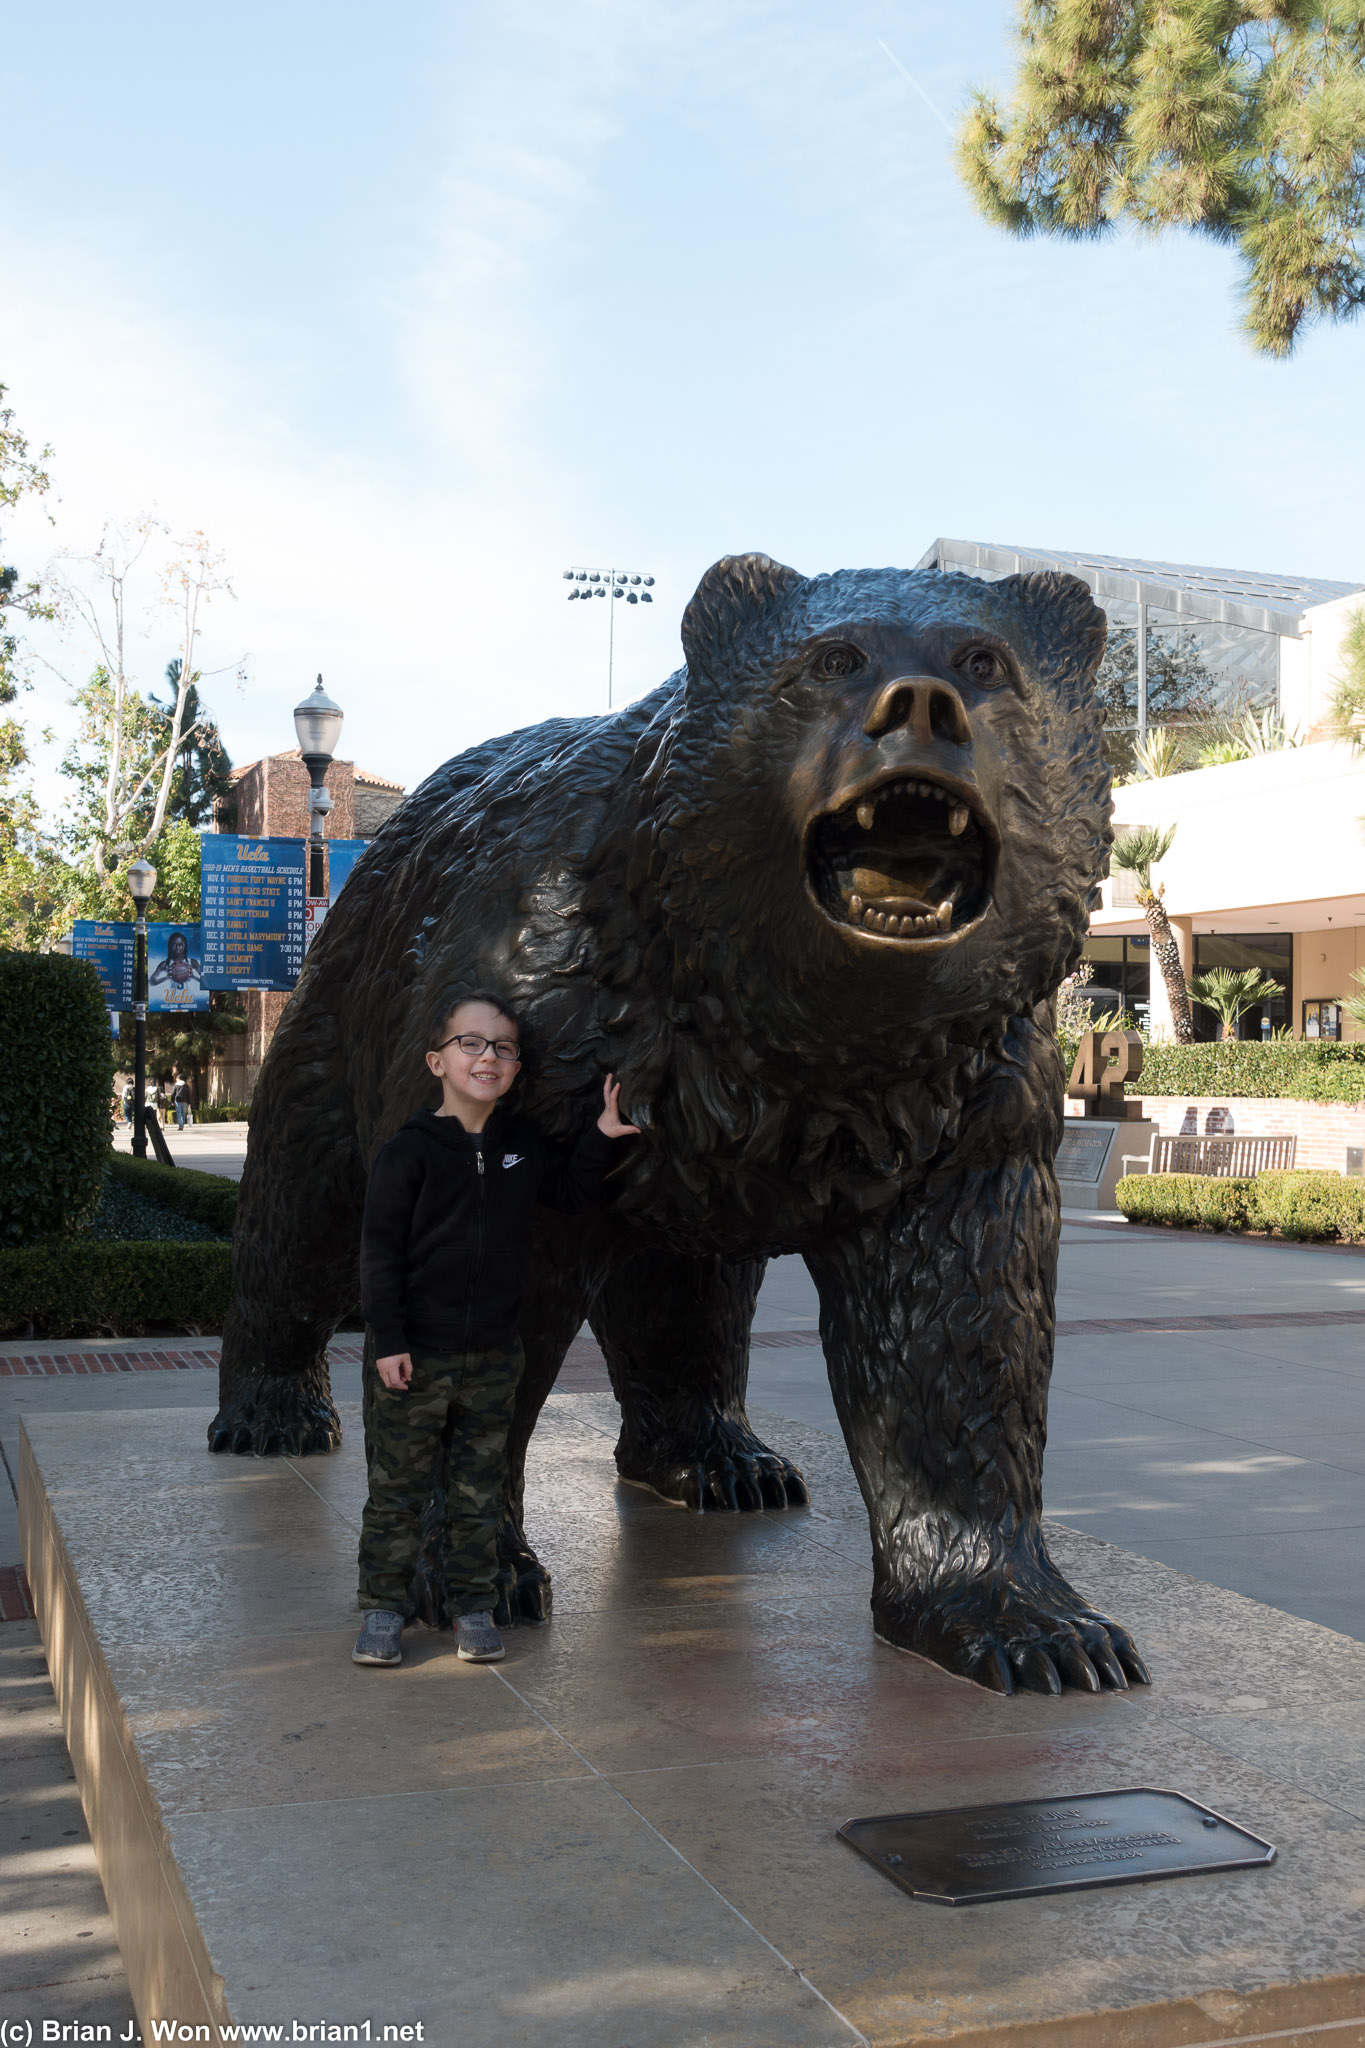 Oliver posing with the Bruin.